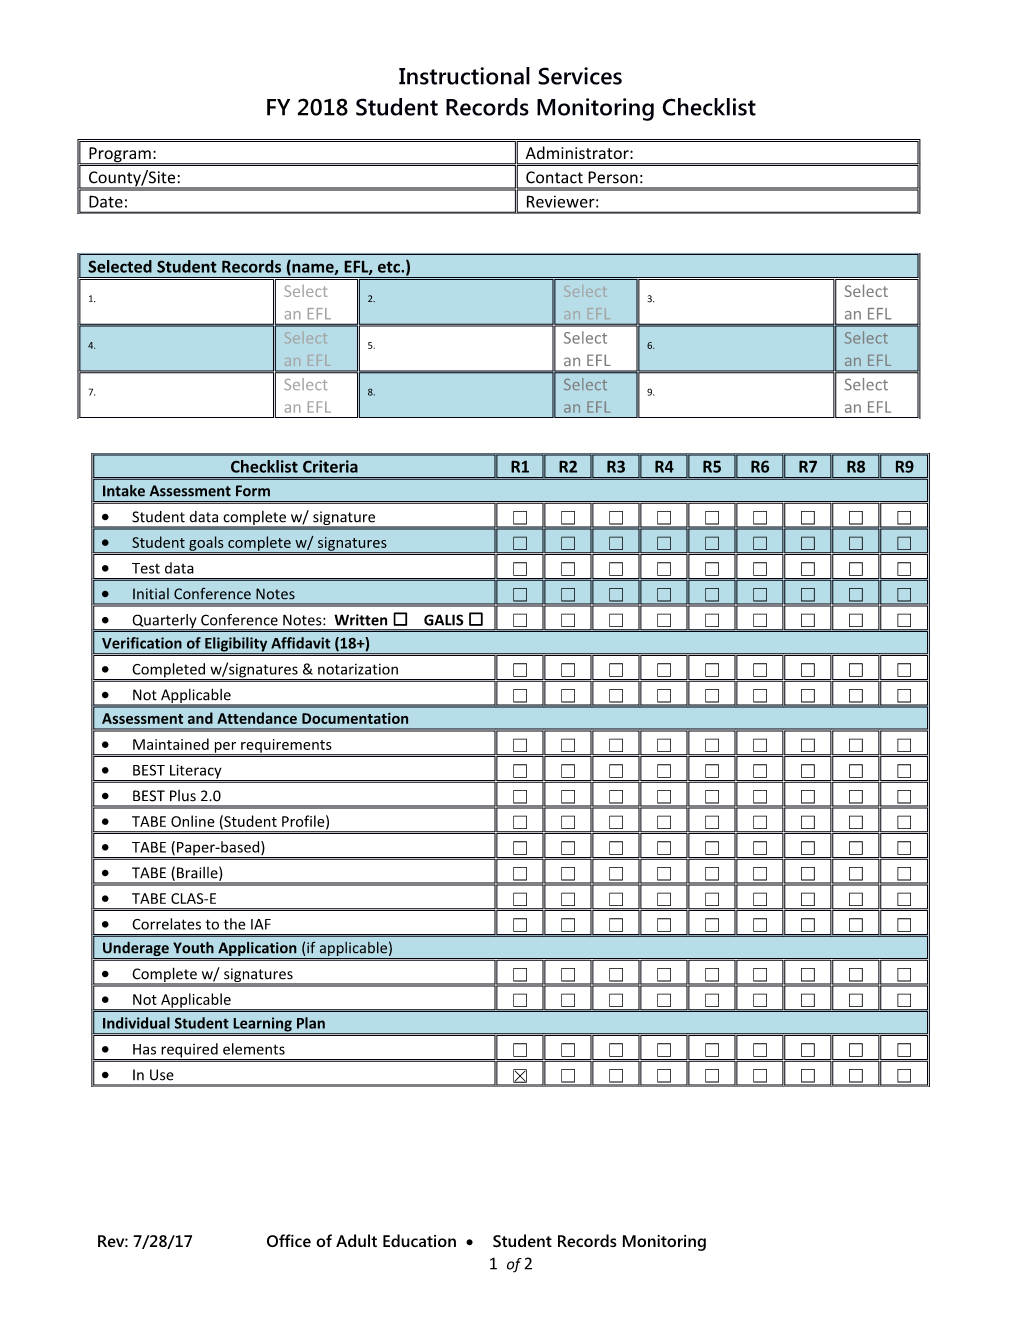 FY 2018 Student Records Monitoring Checklist